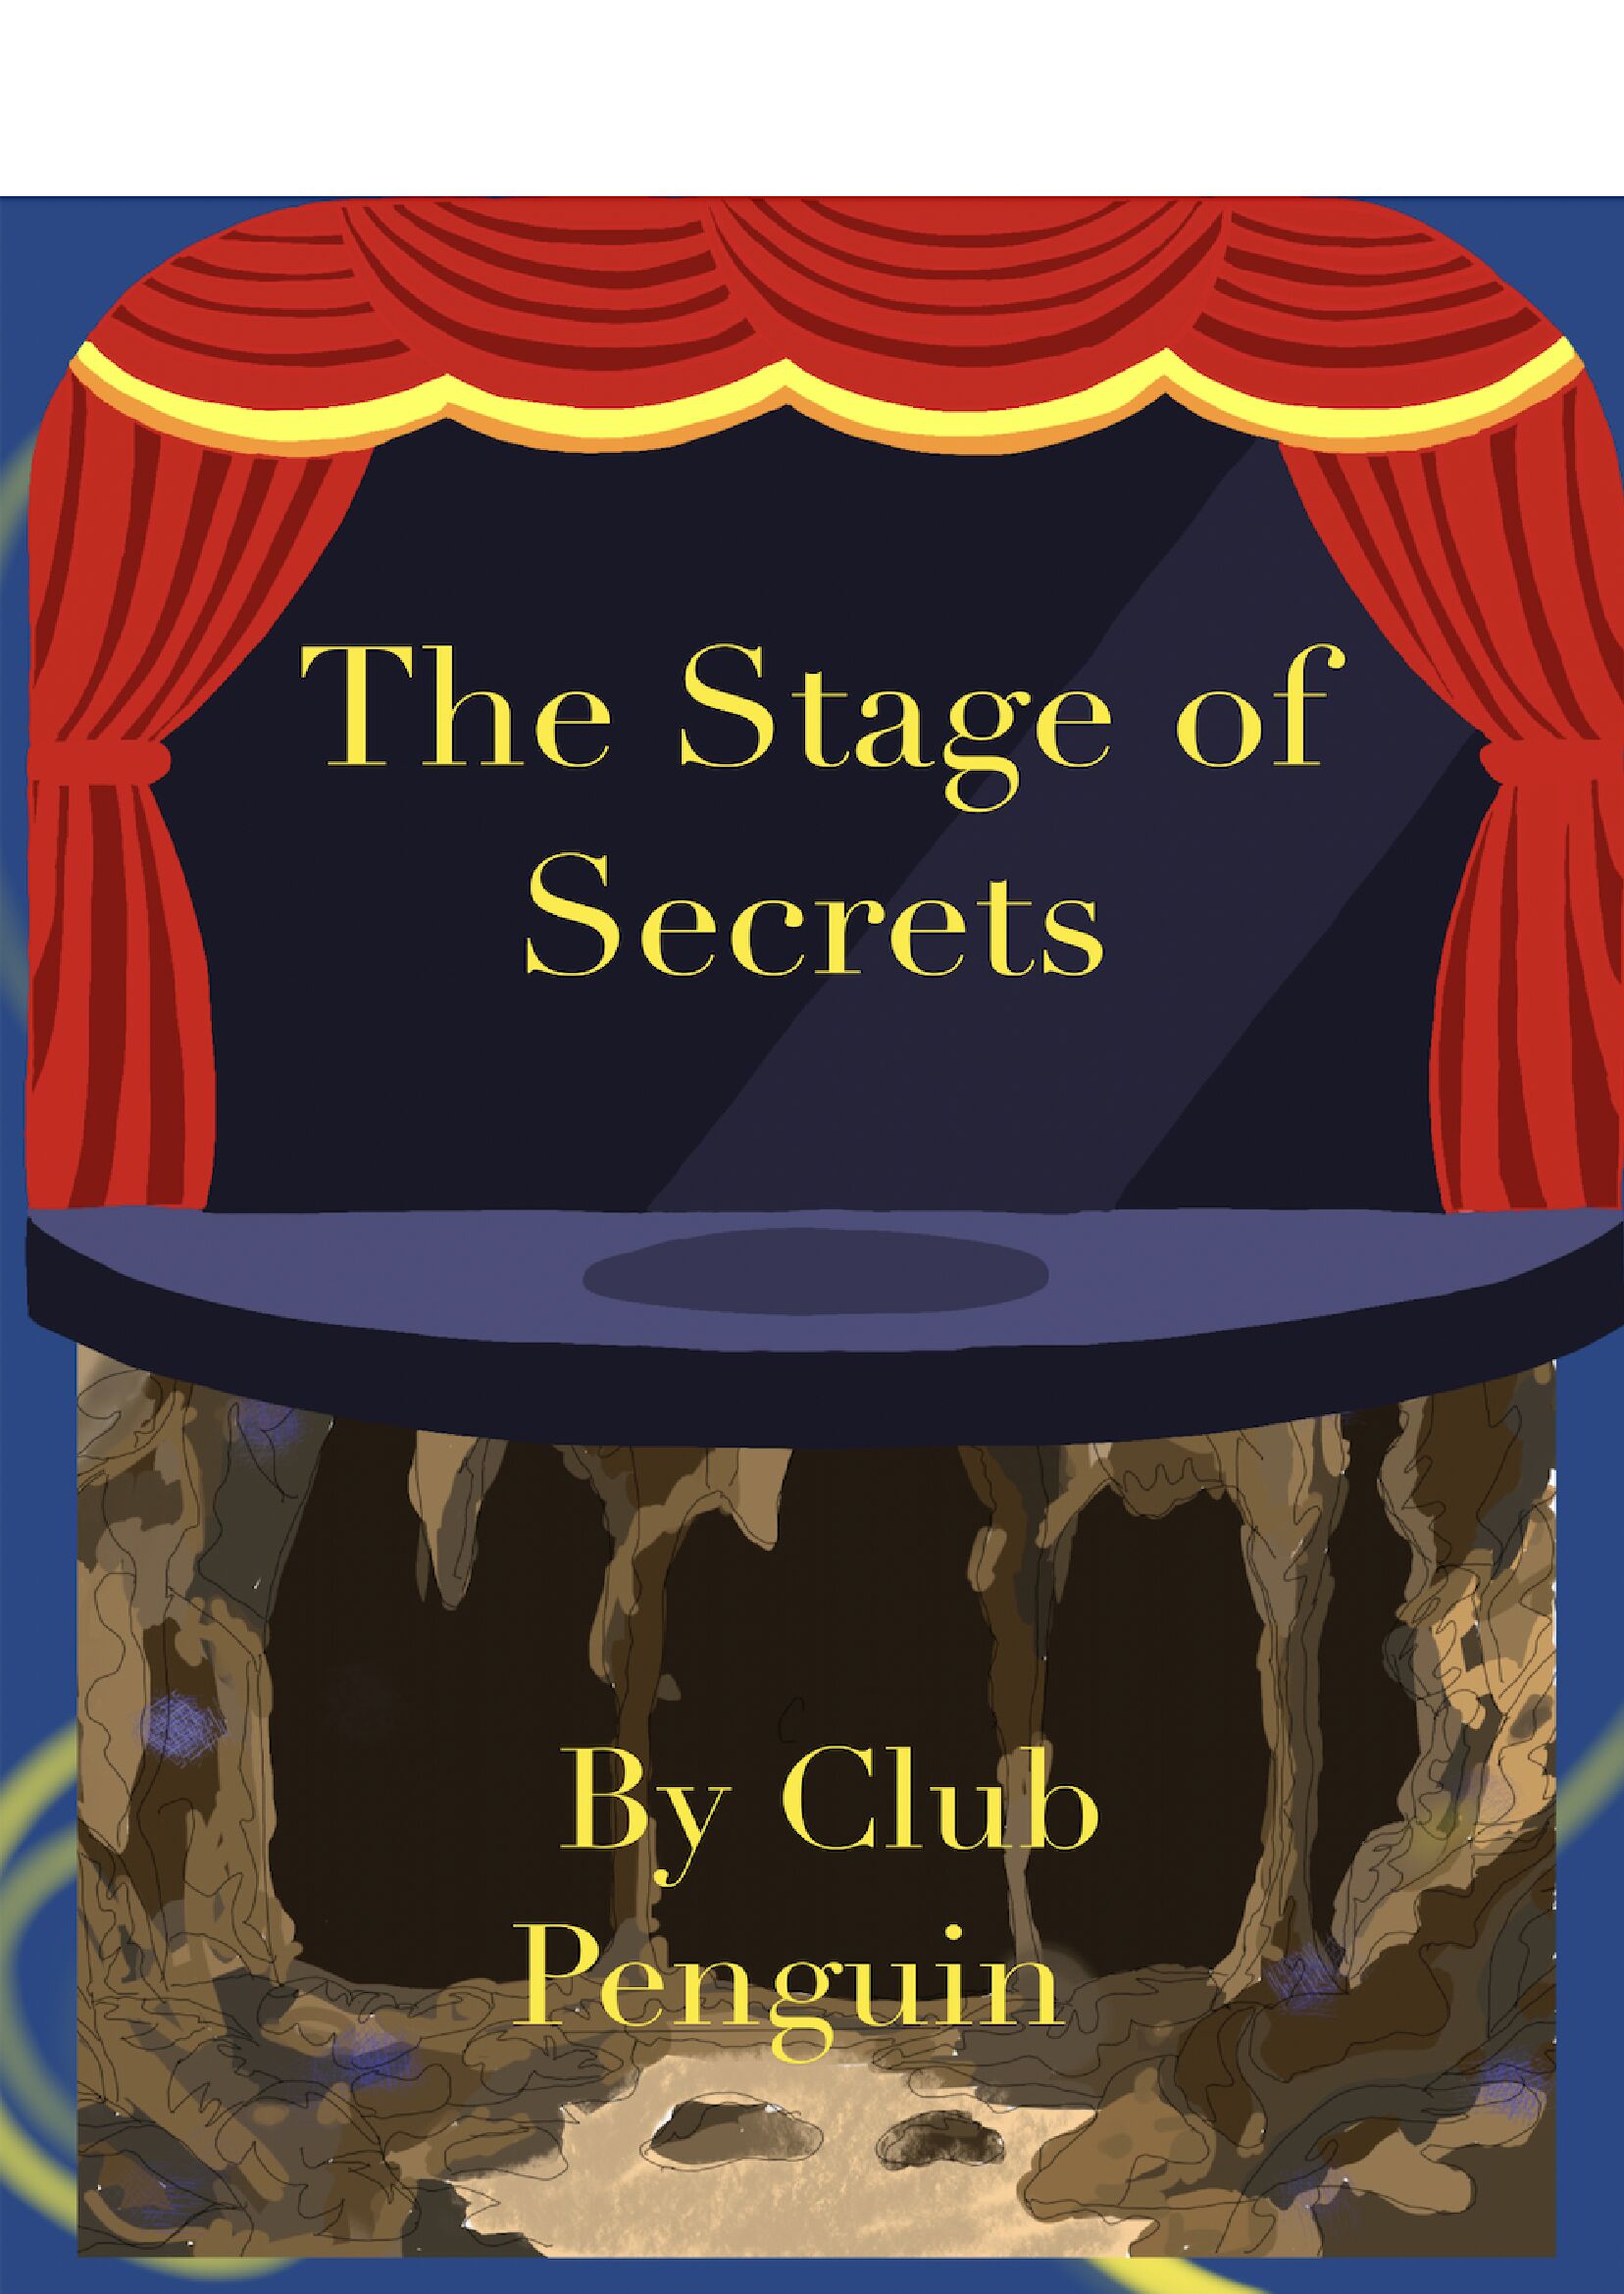 The Stage of Secrets